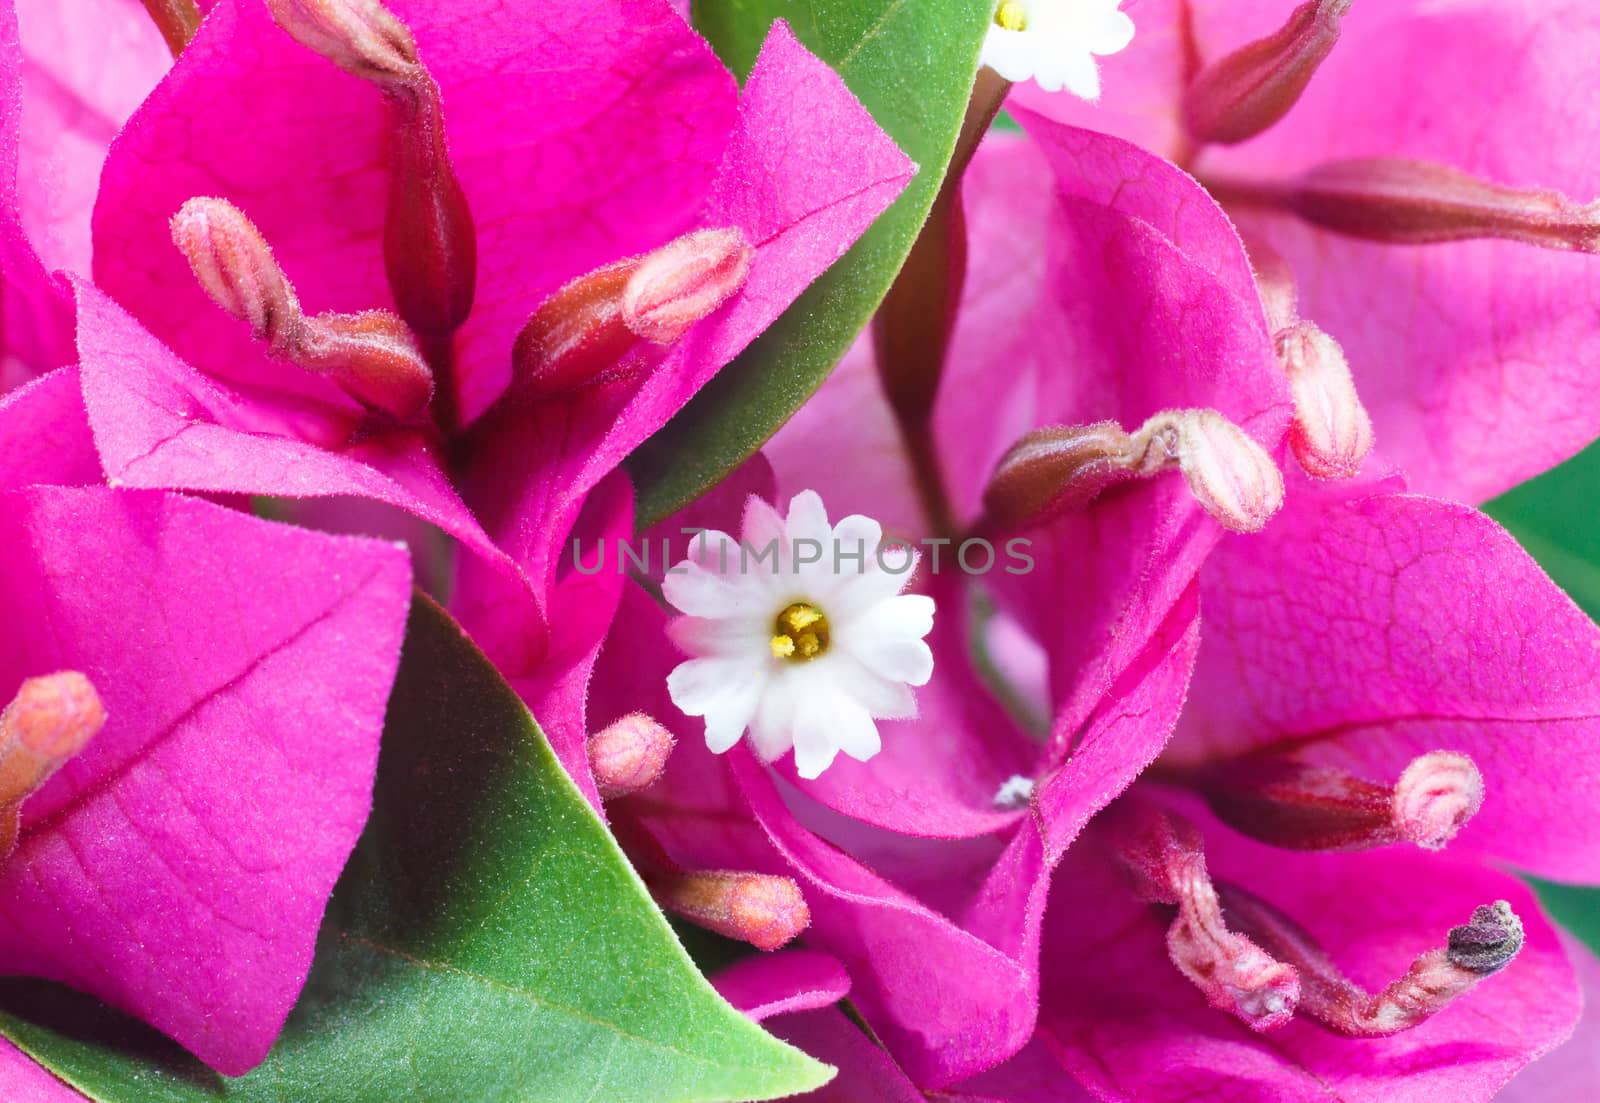 Bougainvillea flower and leaf.